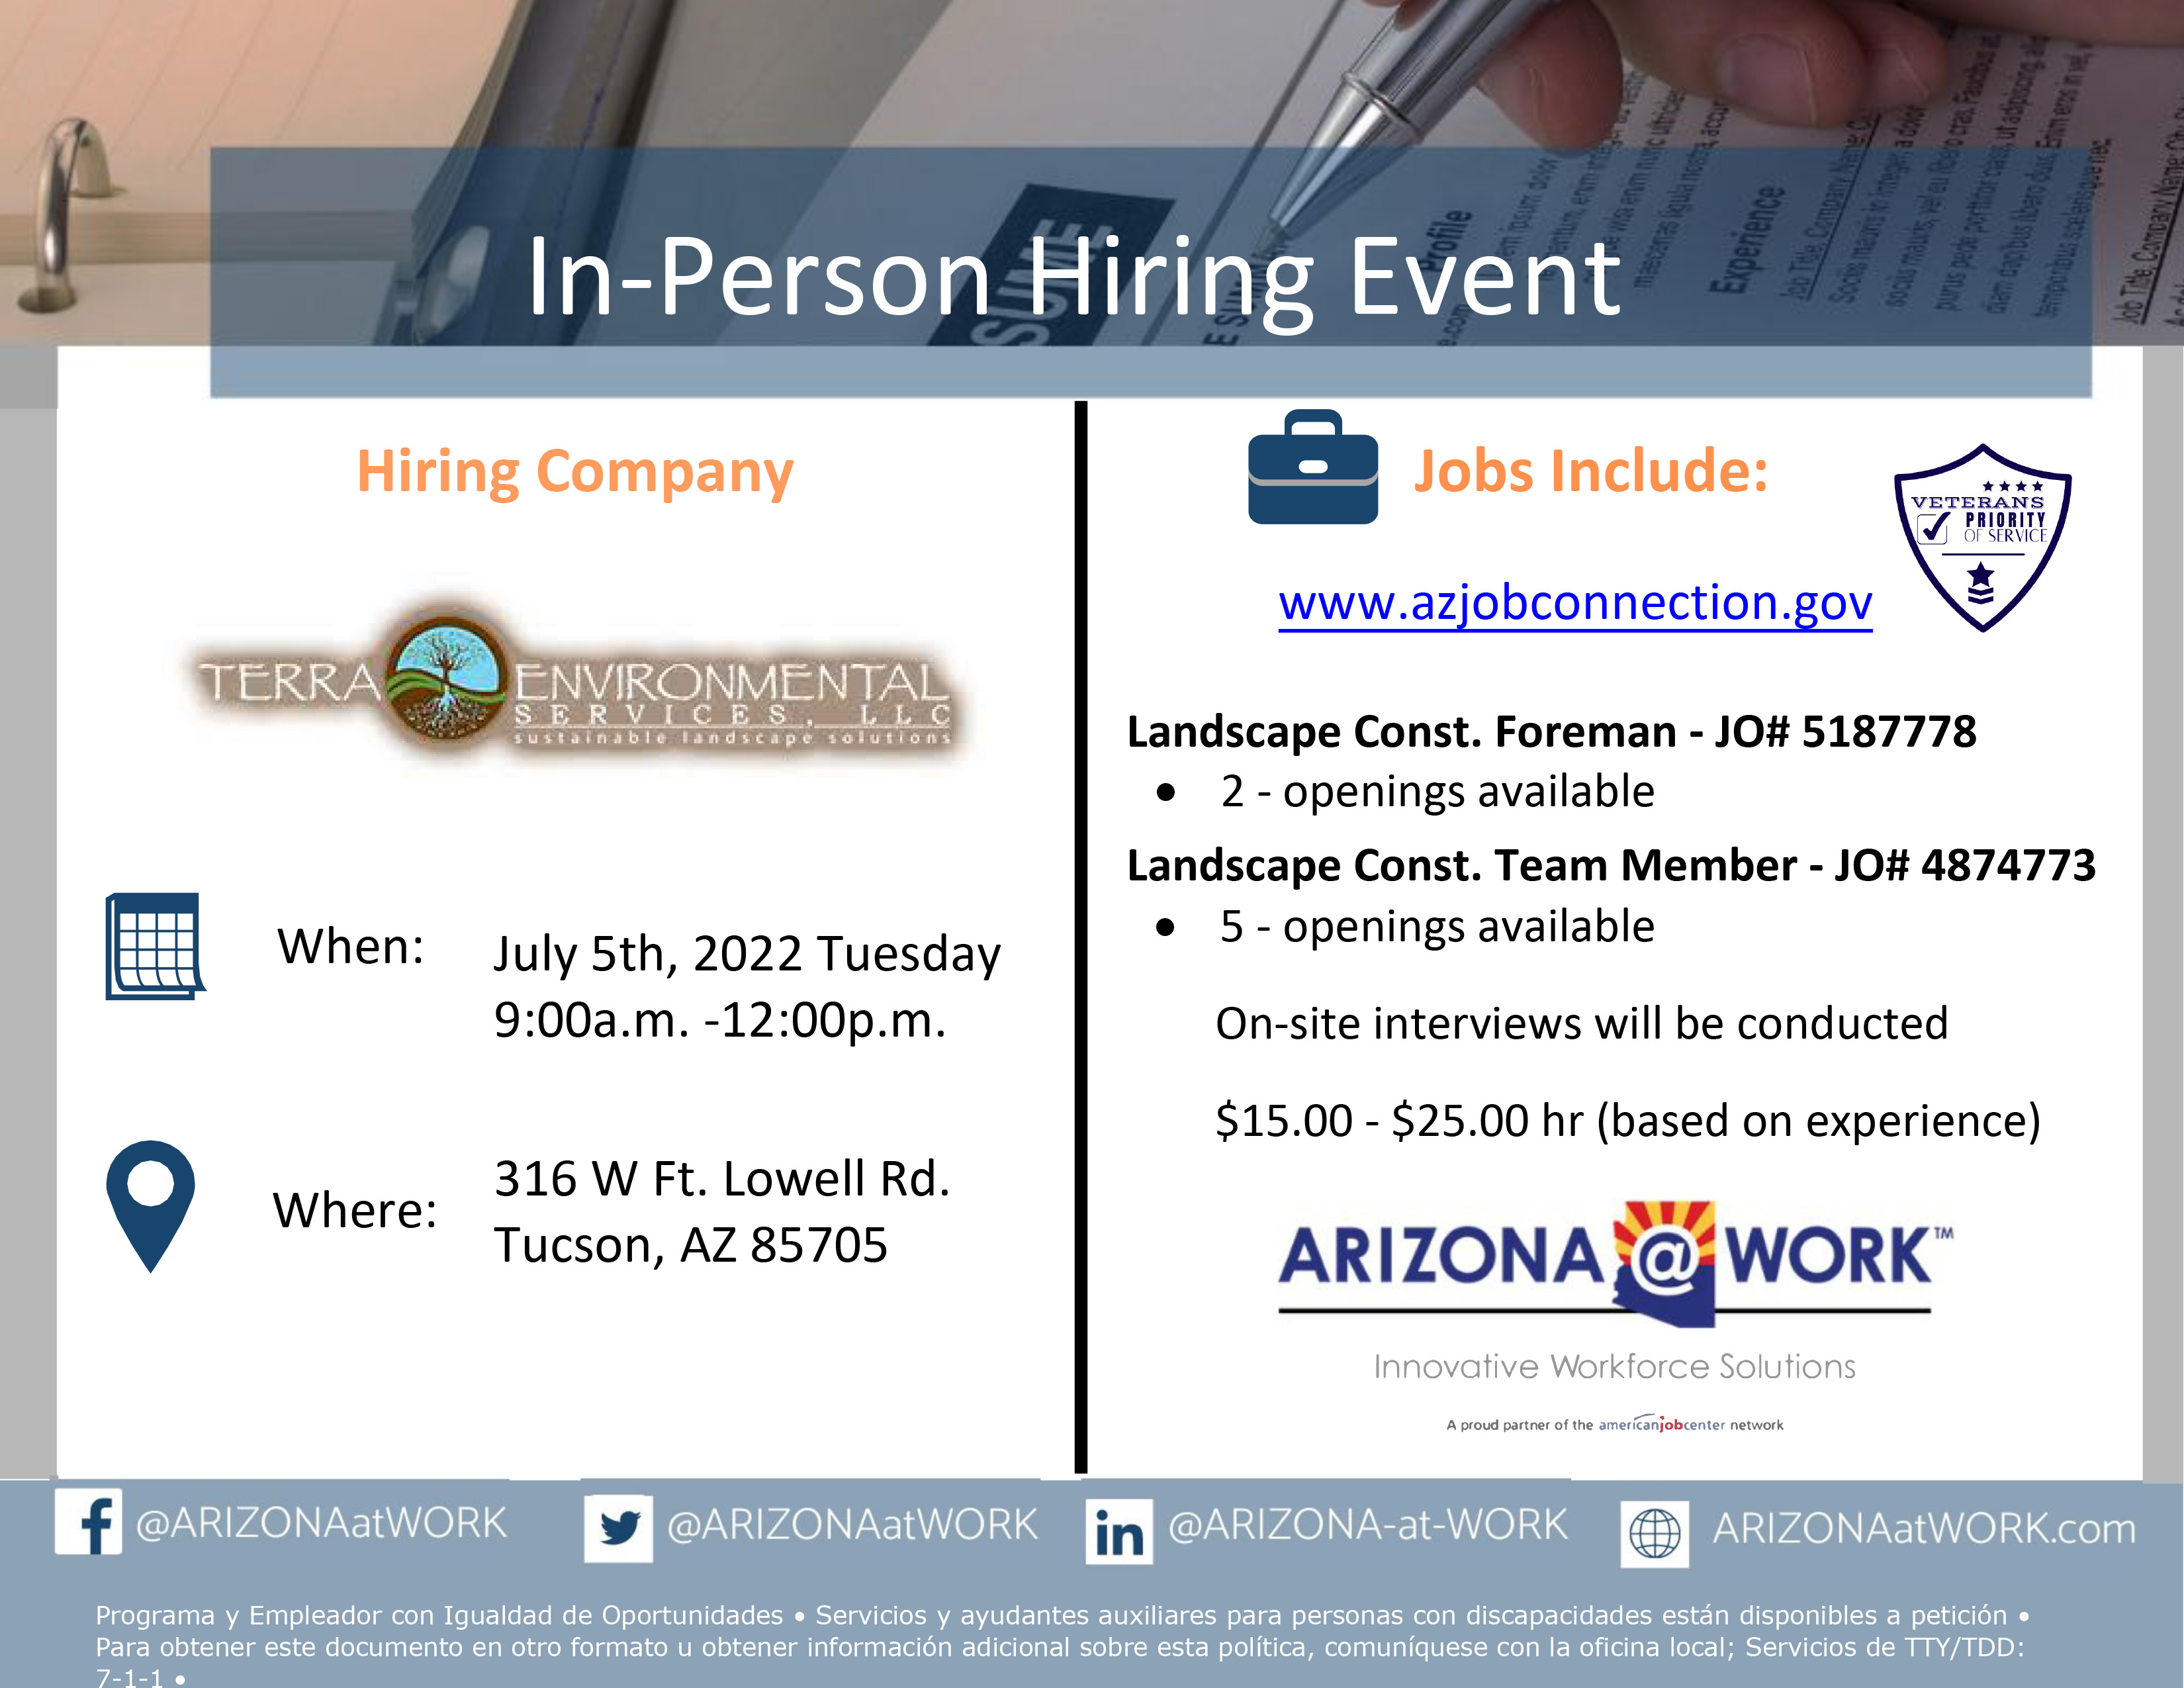 Terra Services is hiring during July 5 hiring event in Tucson